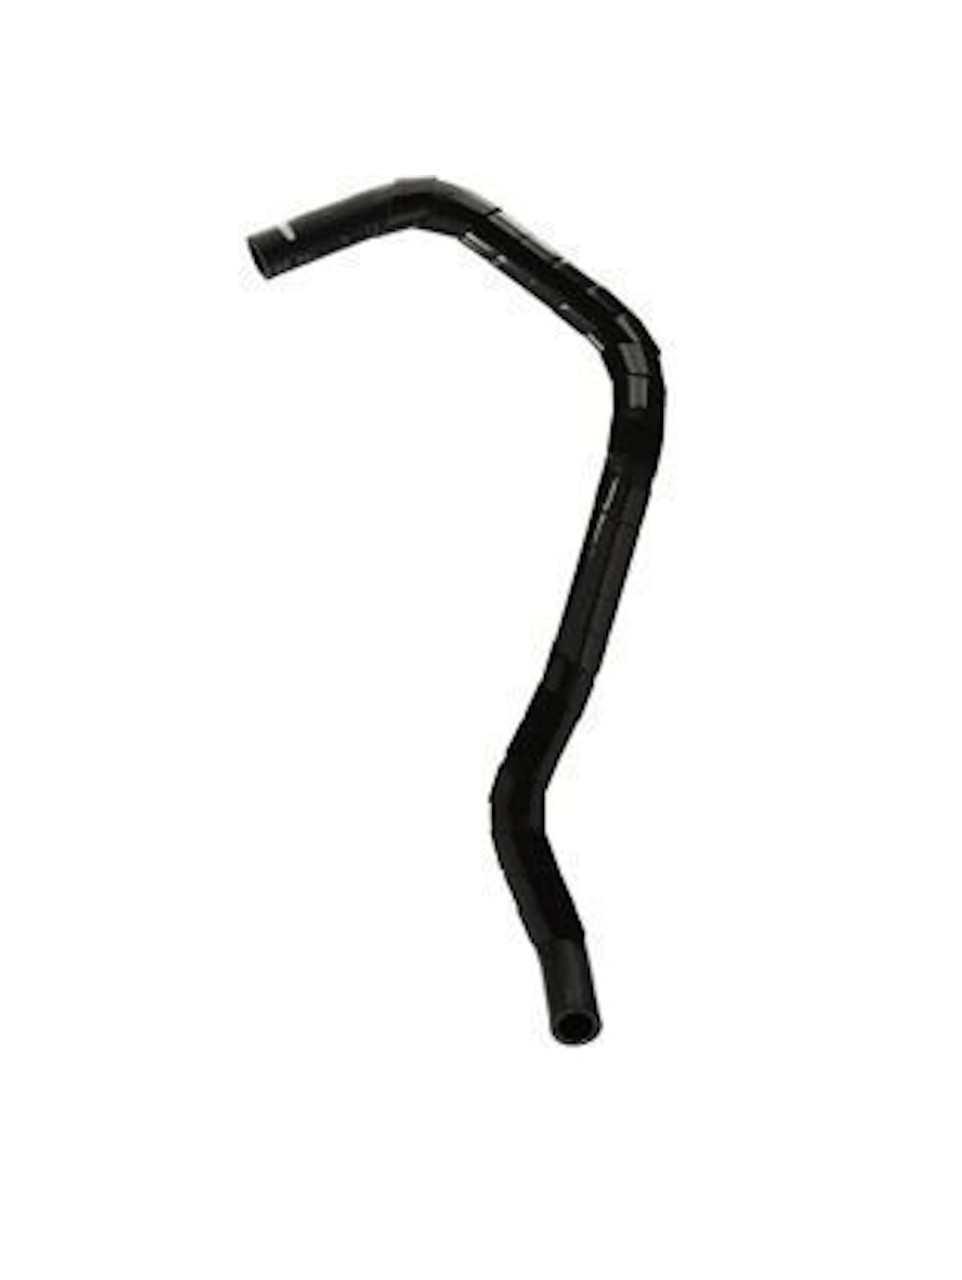 Steering Hose- Toyota Avalon & Camry Power Steering Hose from Reservoir to Pump (1994-1998) 44348-33110